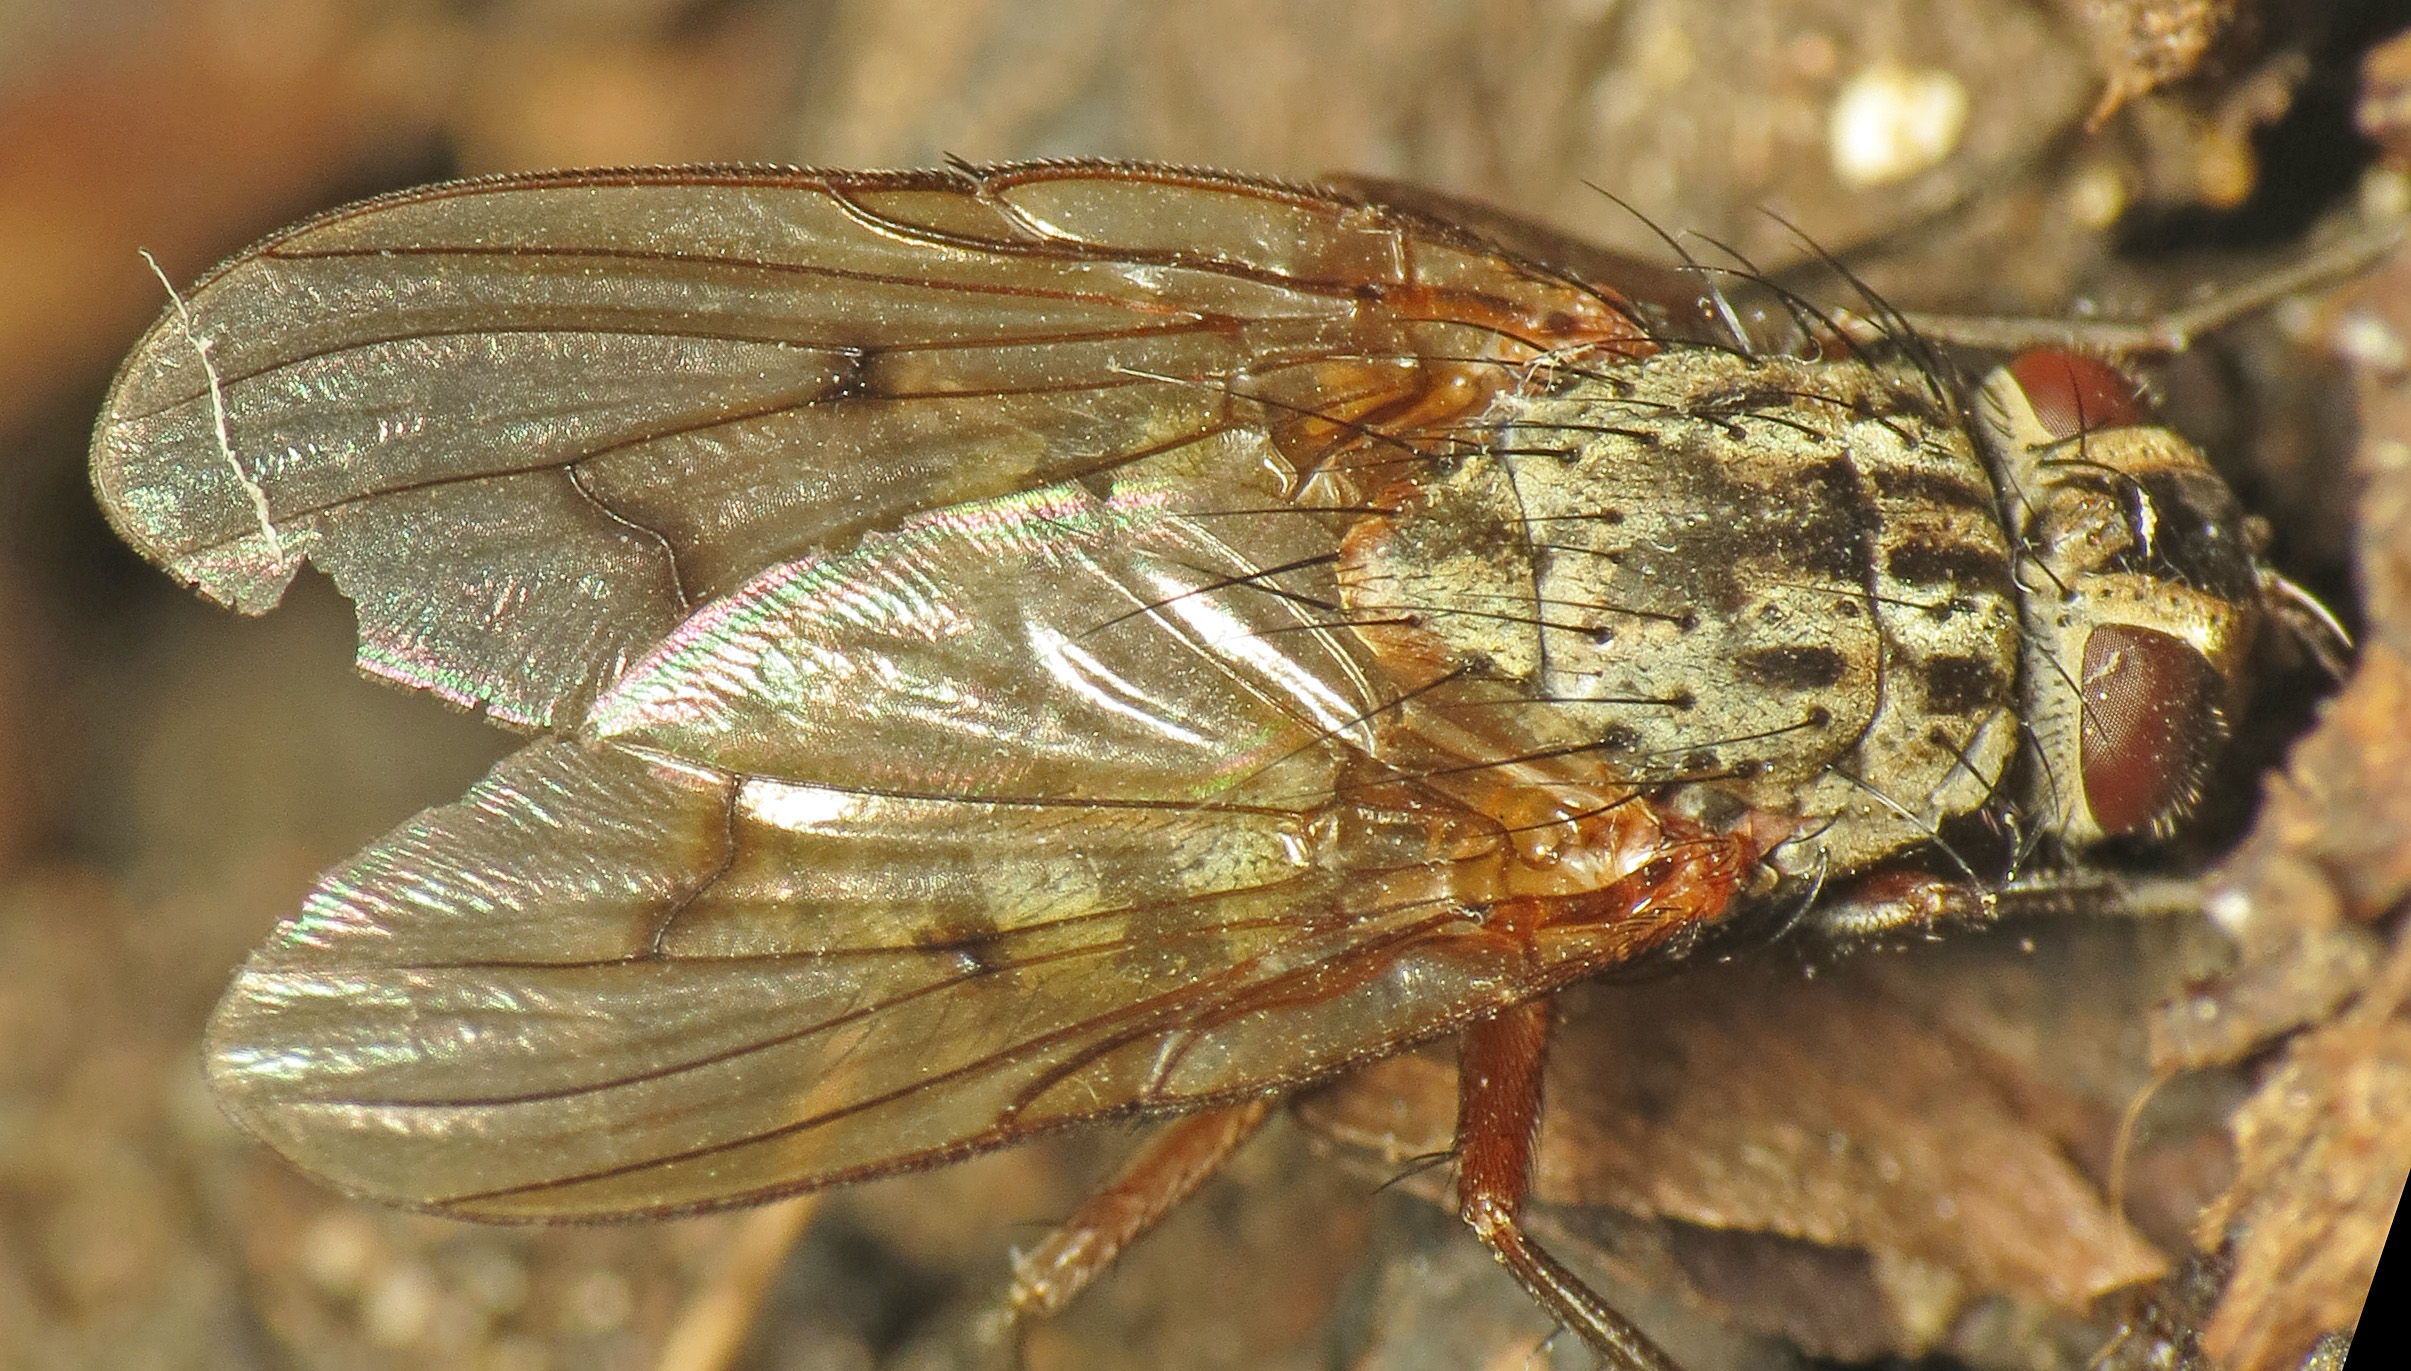 a close up view of a fly sitting on a rock